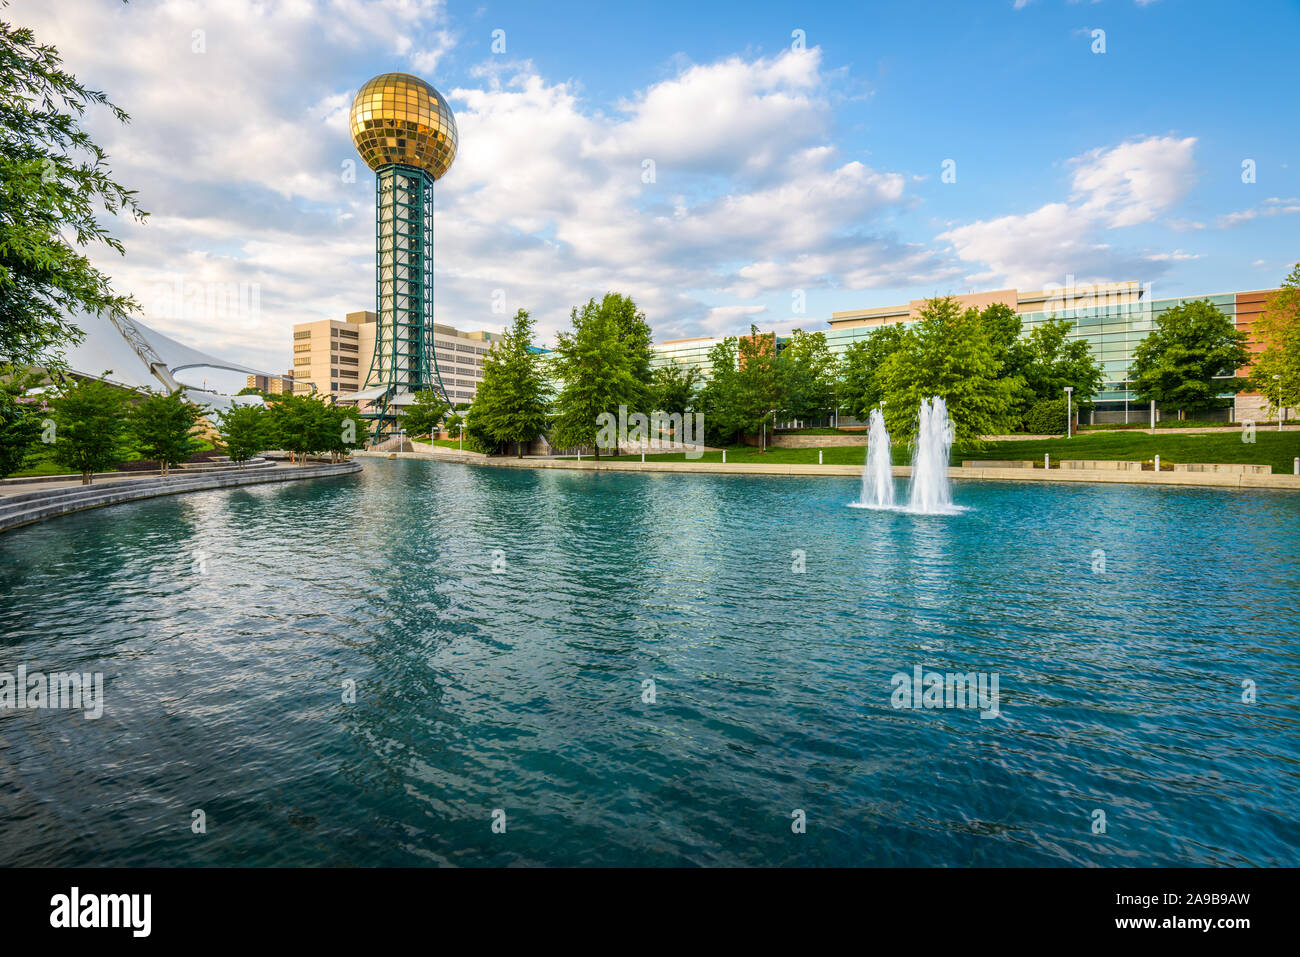 KNOXVILLE, TENNESEEE, USA - JUNE 13, 2013: The Sunsphere at World's Fair park in downtown Knoxville. Stock Photo